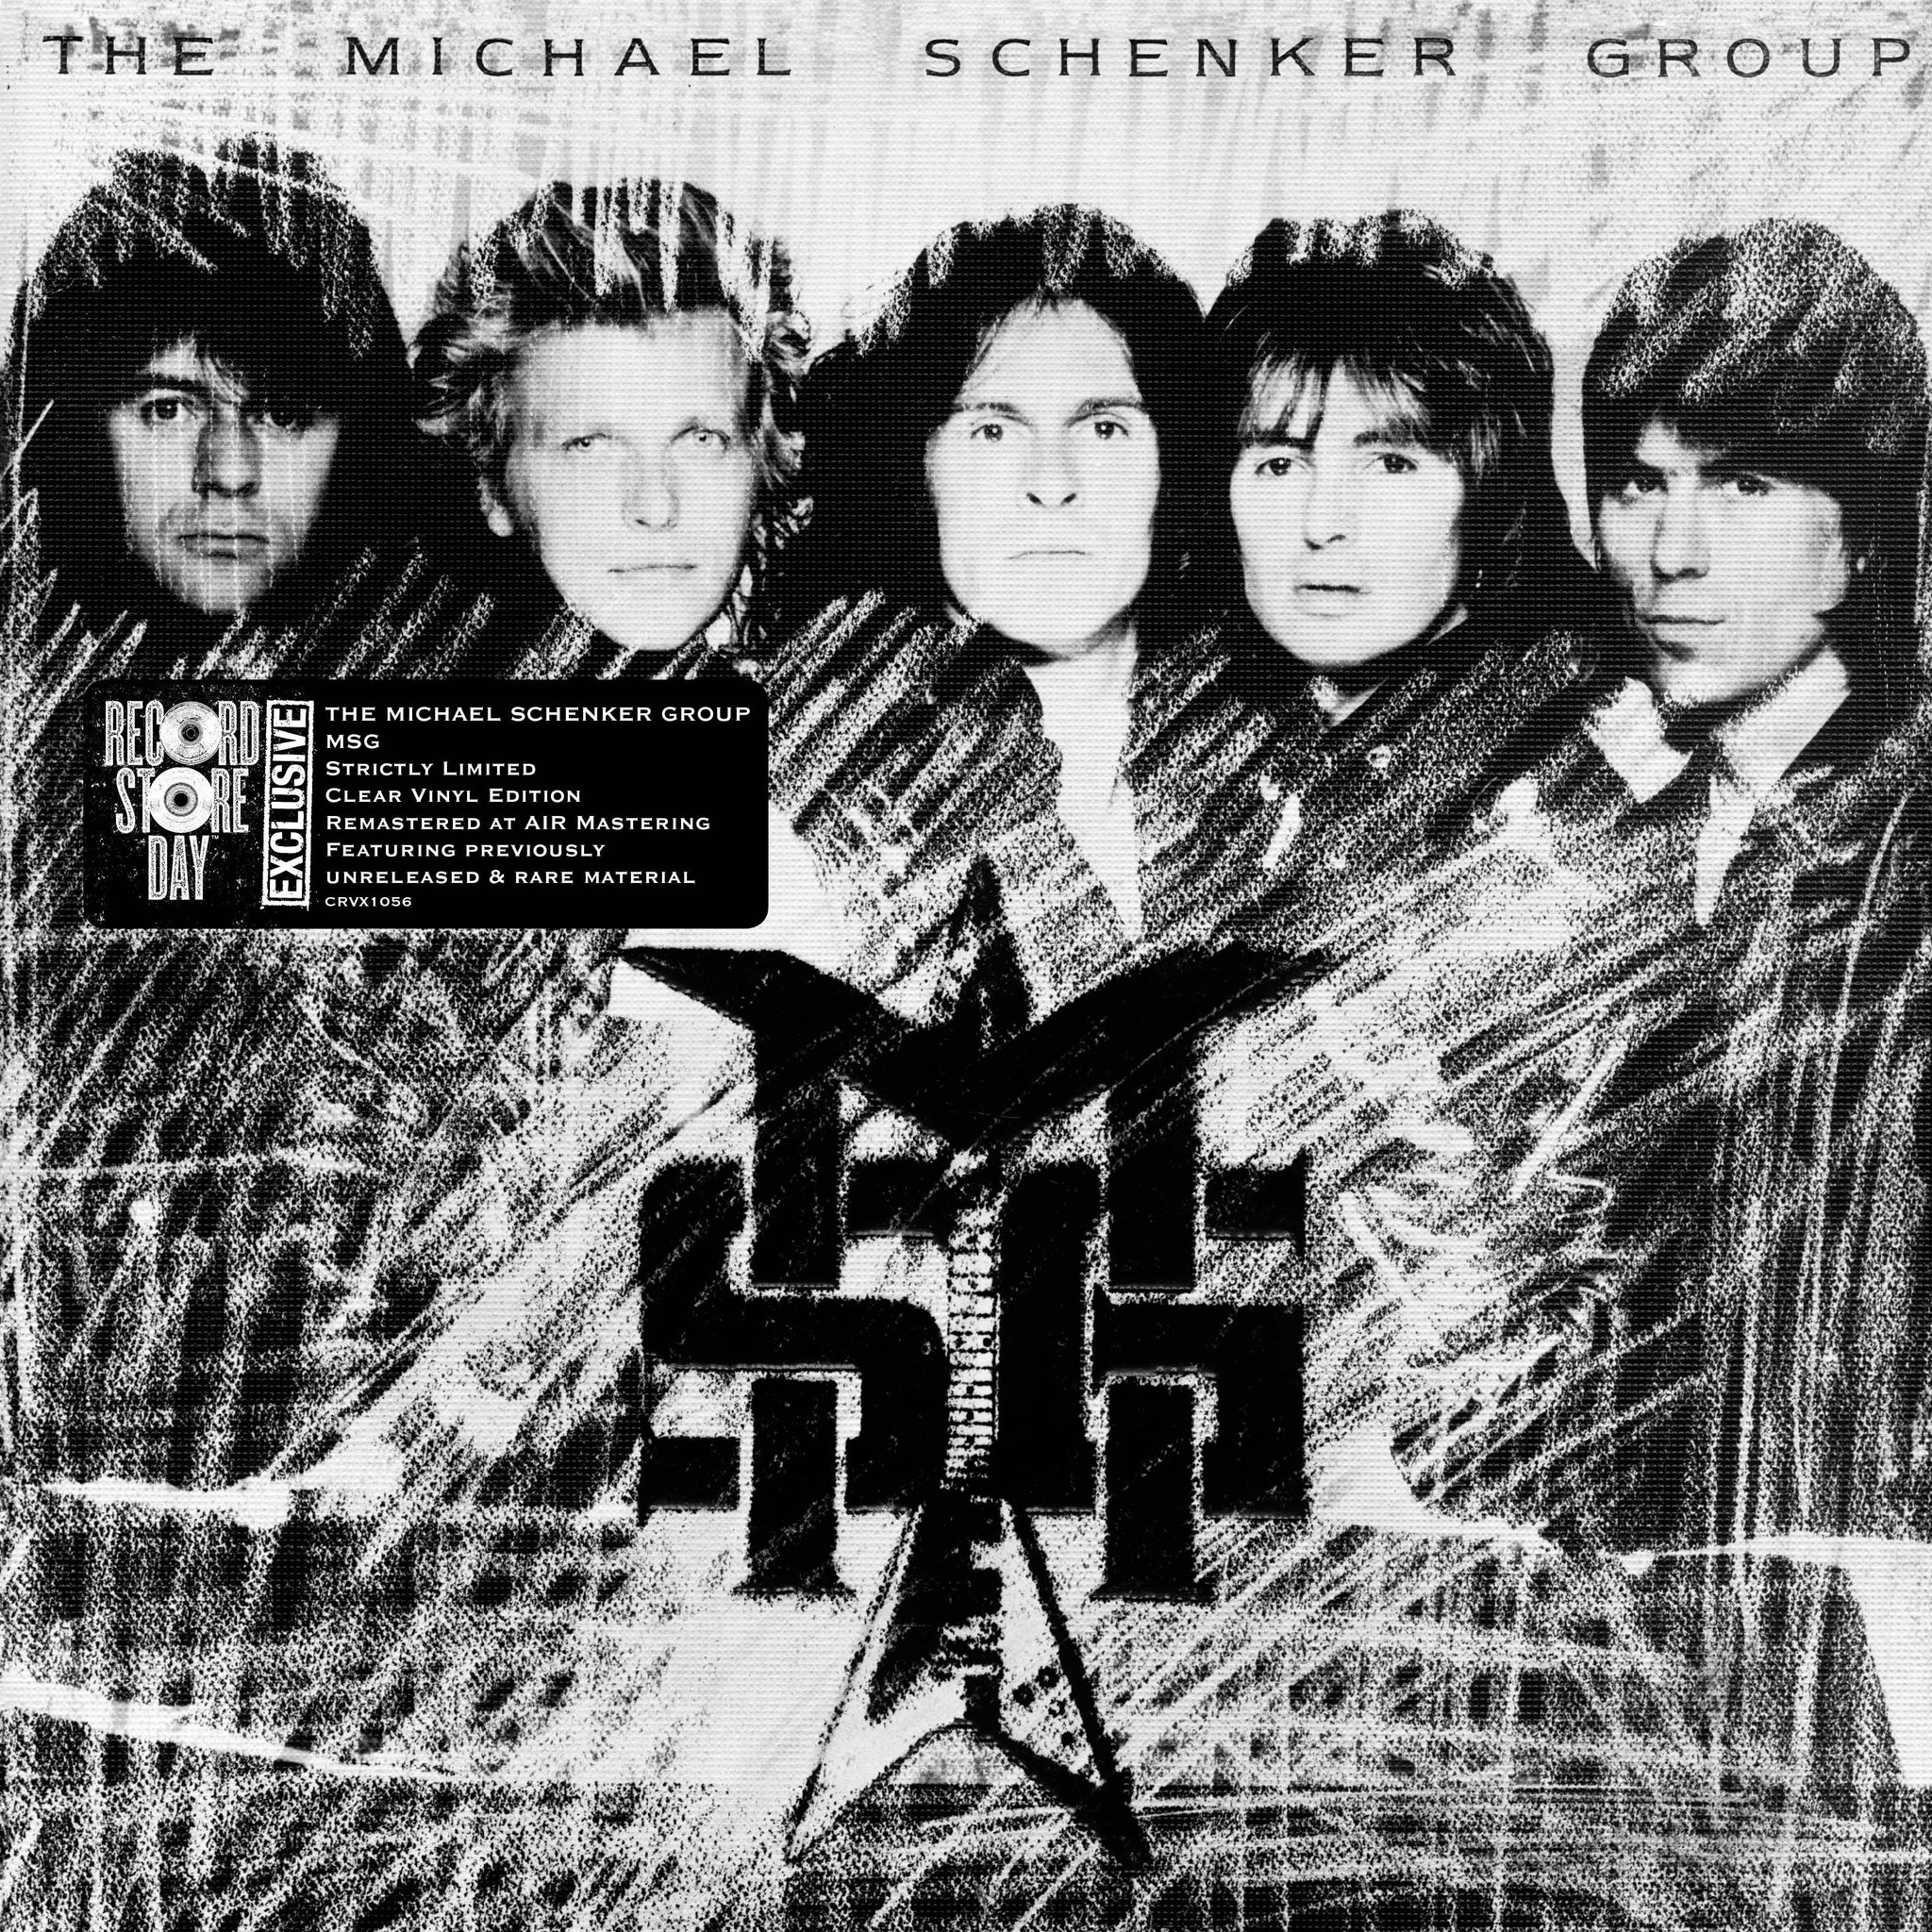 MICHAEL SCHENKER GROUP - MSG (Expanded Edition) - 1 LP - 180g Clear Vinyl  [RSD 2024]